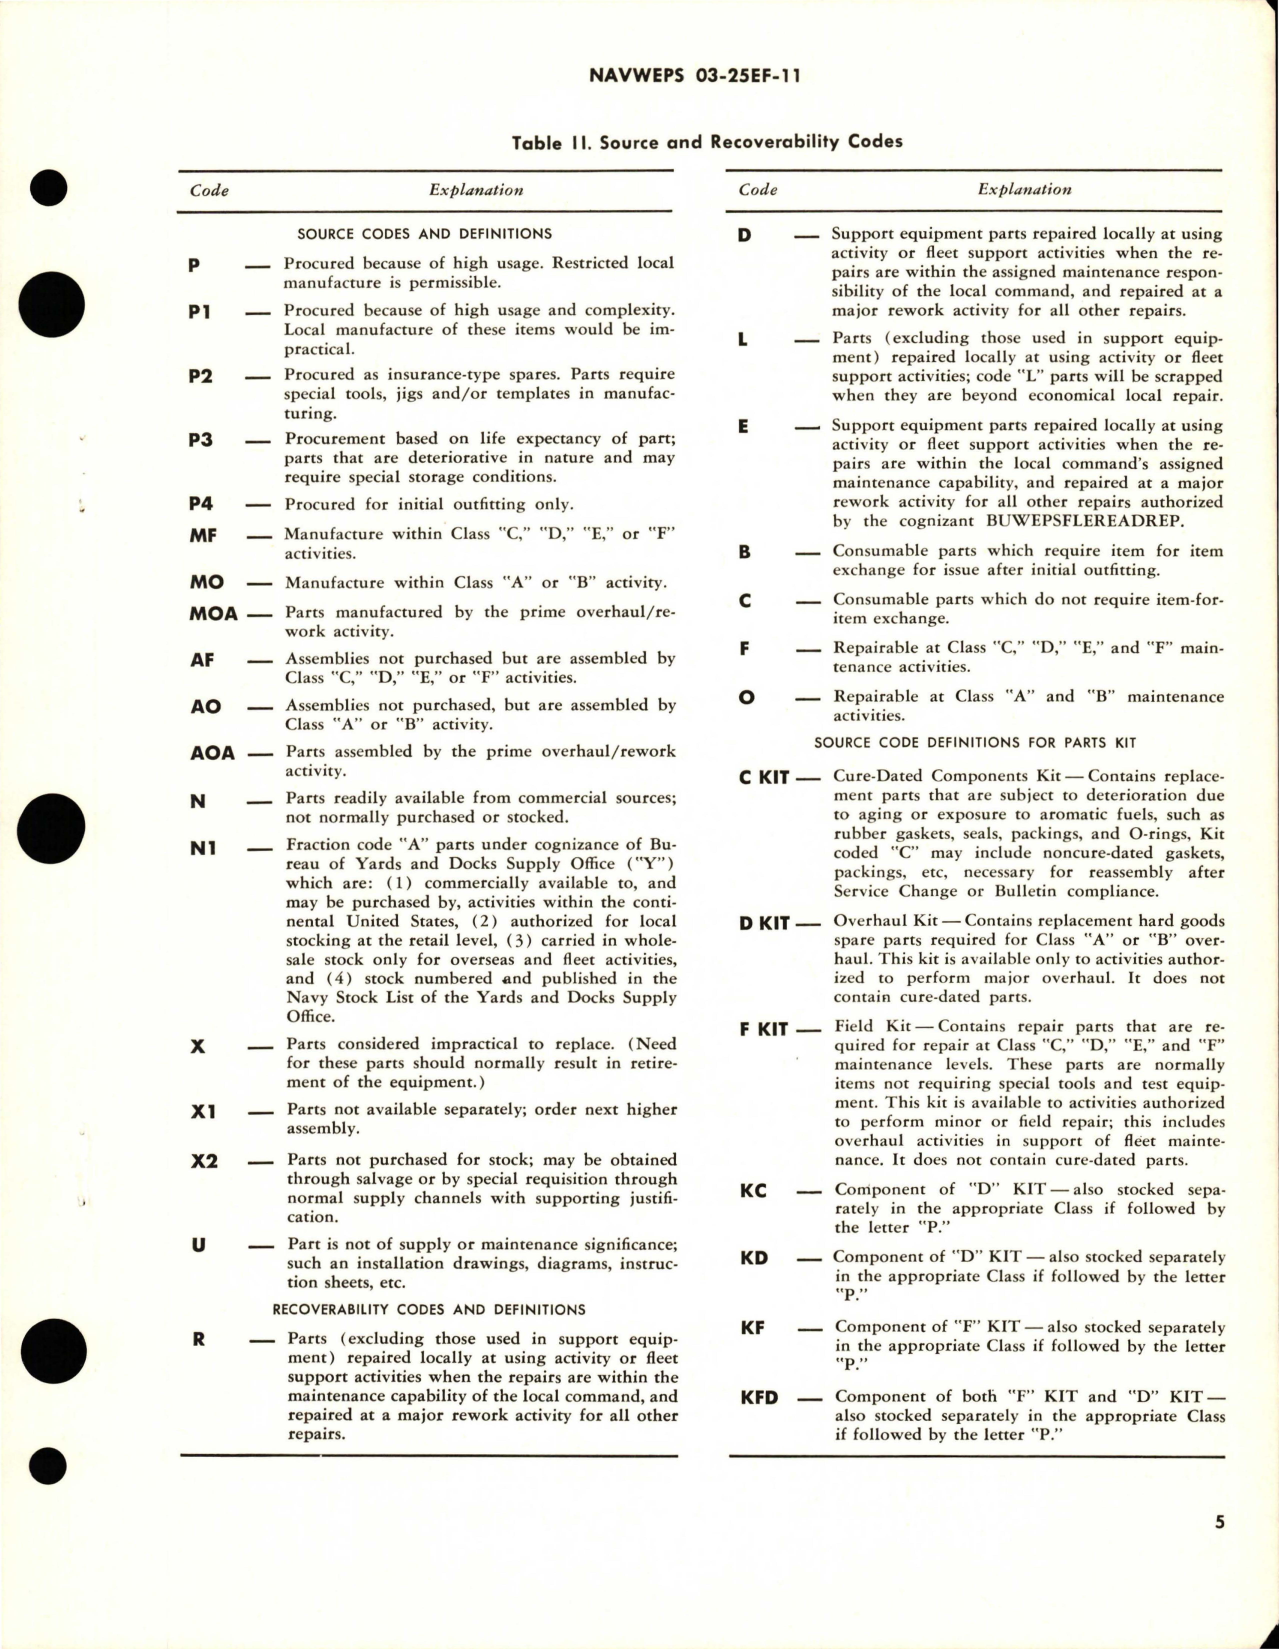 Sample page 5 from AirCorps Library document: Overhaul Instructions with Parts Breakdown for Nose Landing Gear Actuating Cylinder - Parts 601900-501, 601900-503, 601900-505, and 601900-507